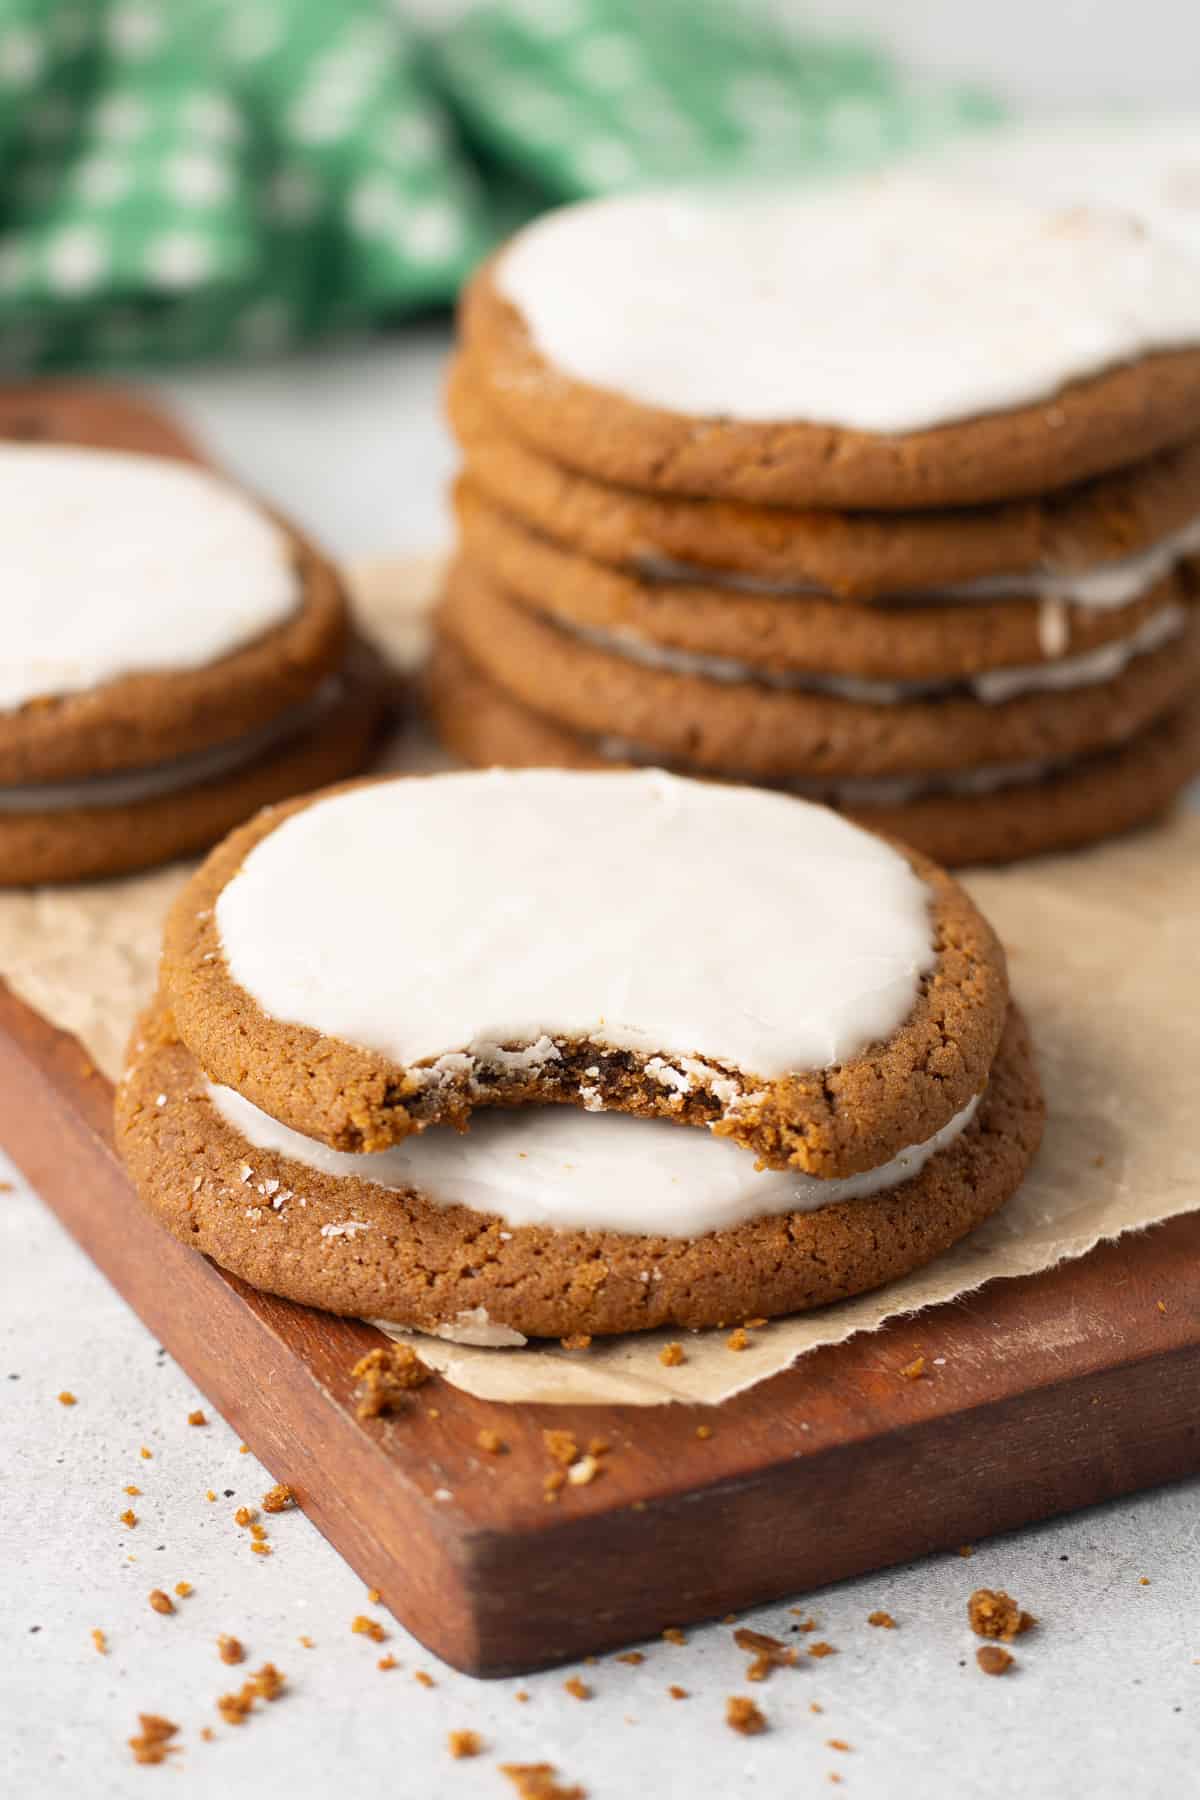 A molasses cookie with a bite missing stack on top  of another cookies on a wood board.